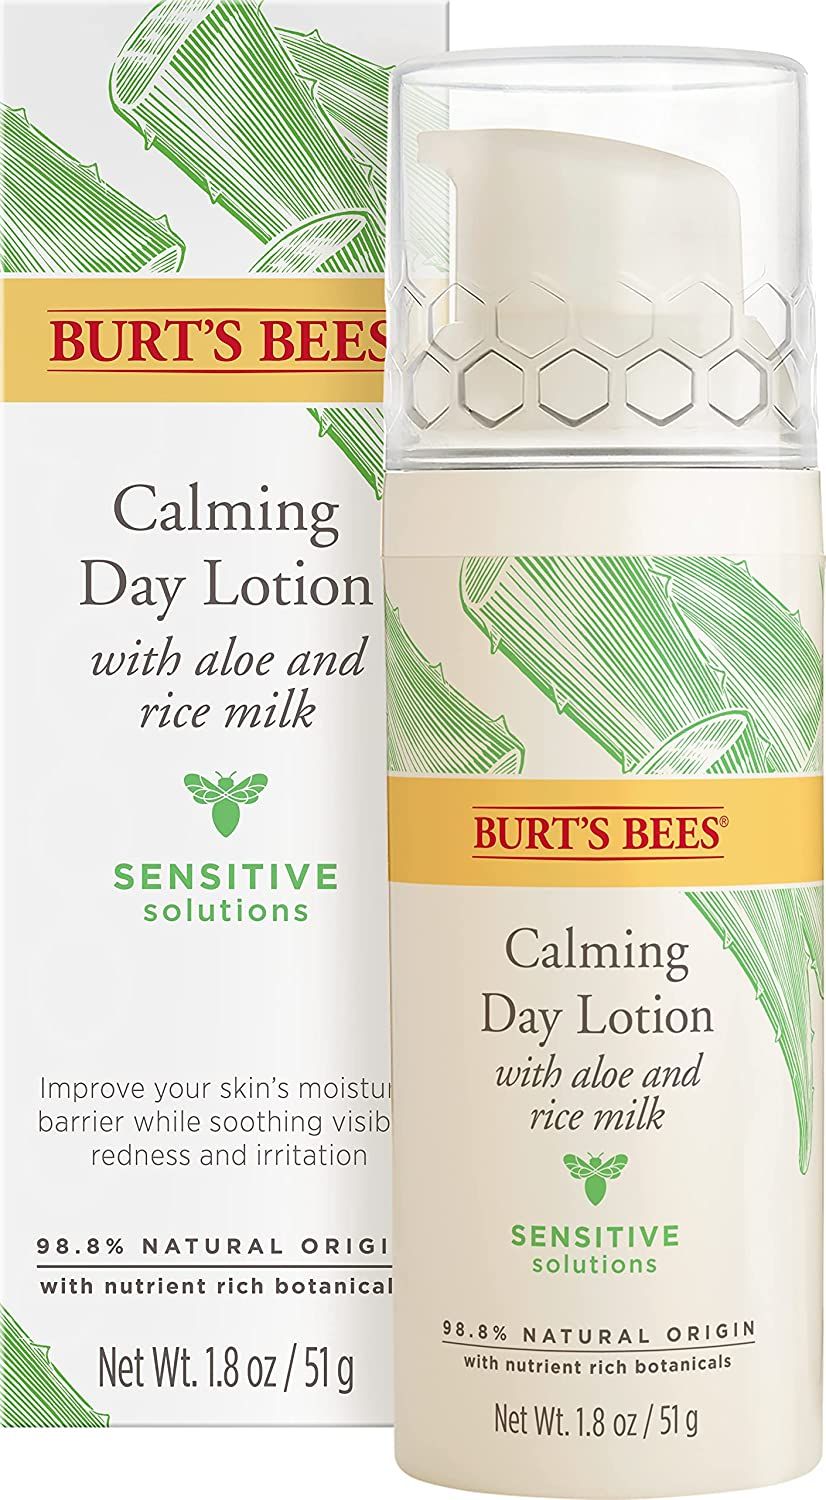 Burt's Bees® Sensitive Solutions Calming Day Lotion with Aloe & Rice Milk - 1.8 fl oz